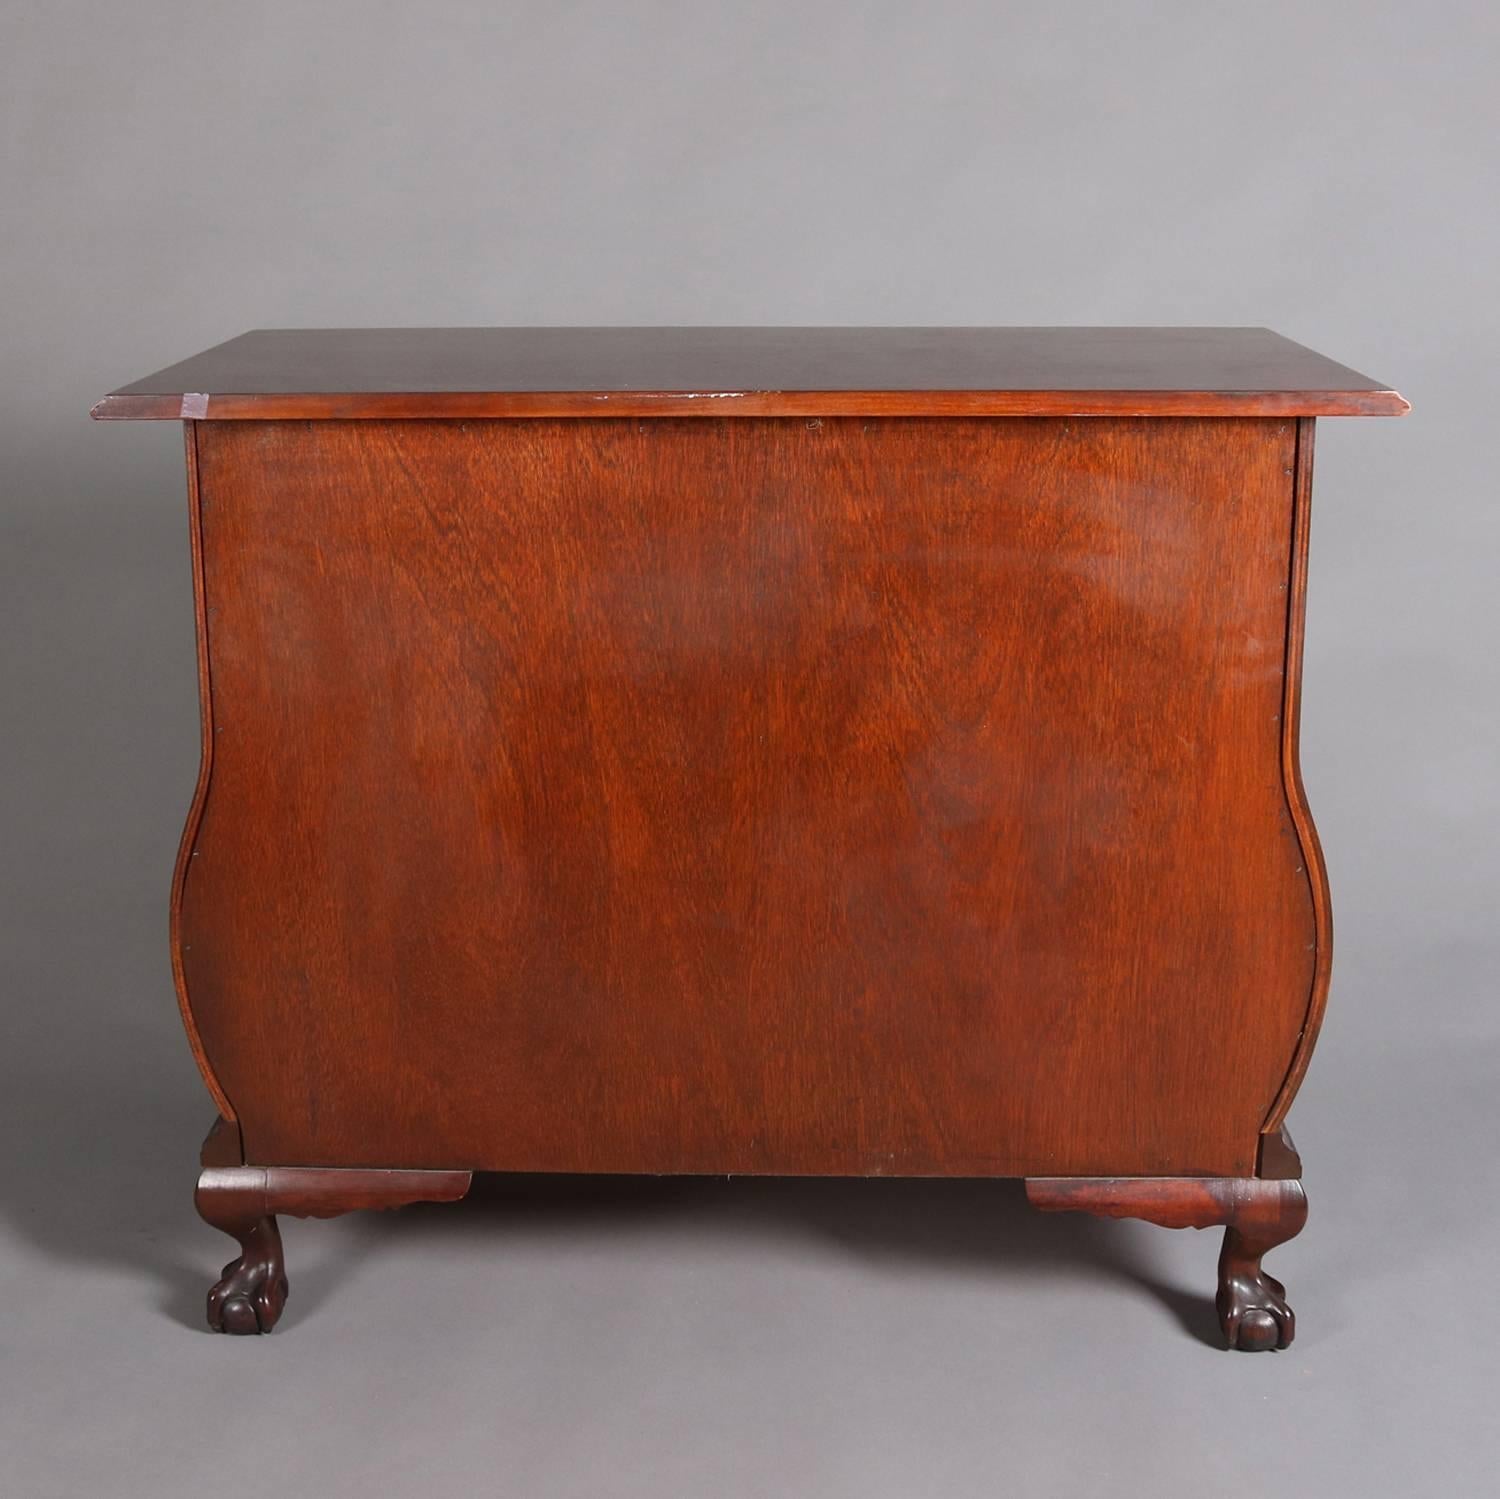 Baker Furniture Historic Charleston Chippendale Mahogany Ball & Claw Bombe Chest 1